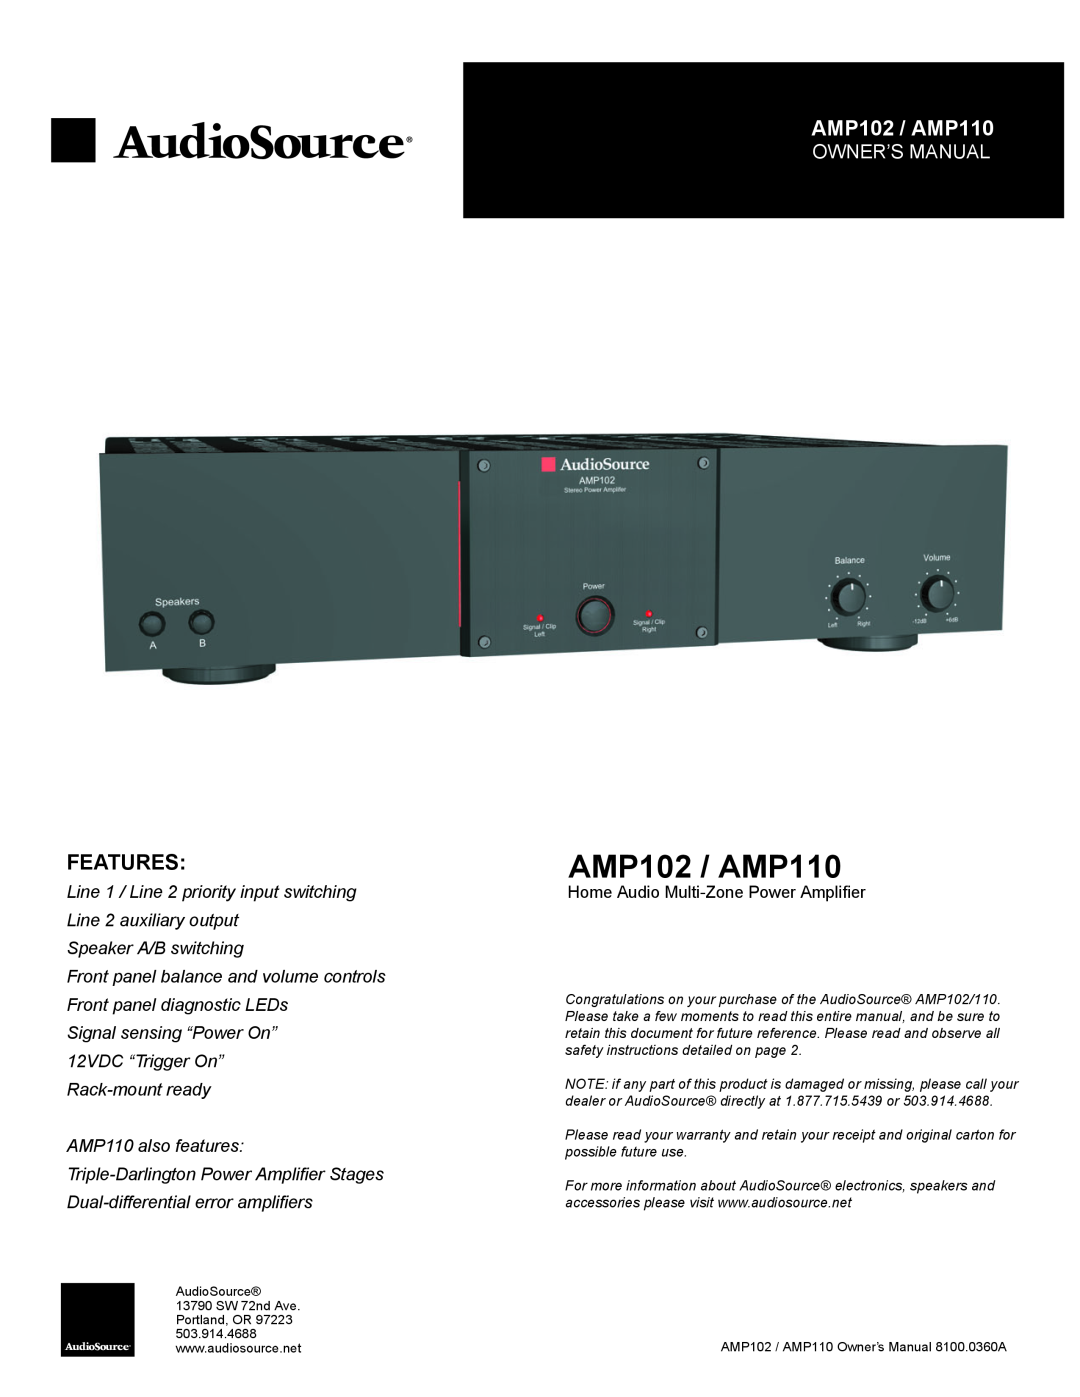 AudioSource Home Audio Multi-Zone Power Amplier owner manual AMP102 / AMP110, Features 